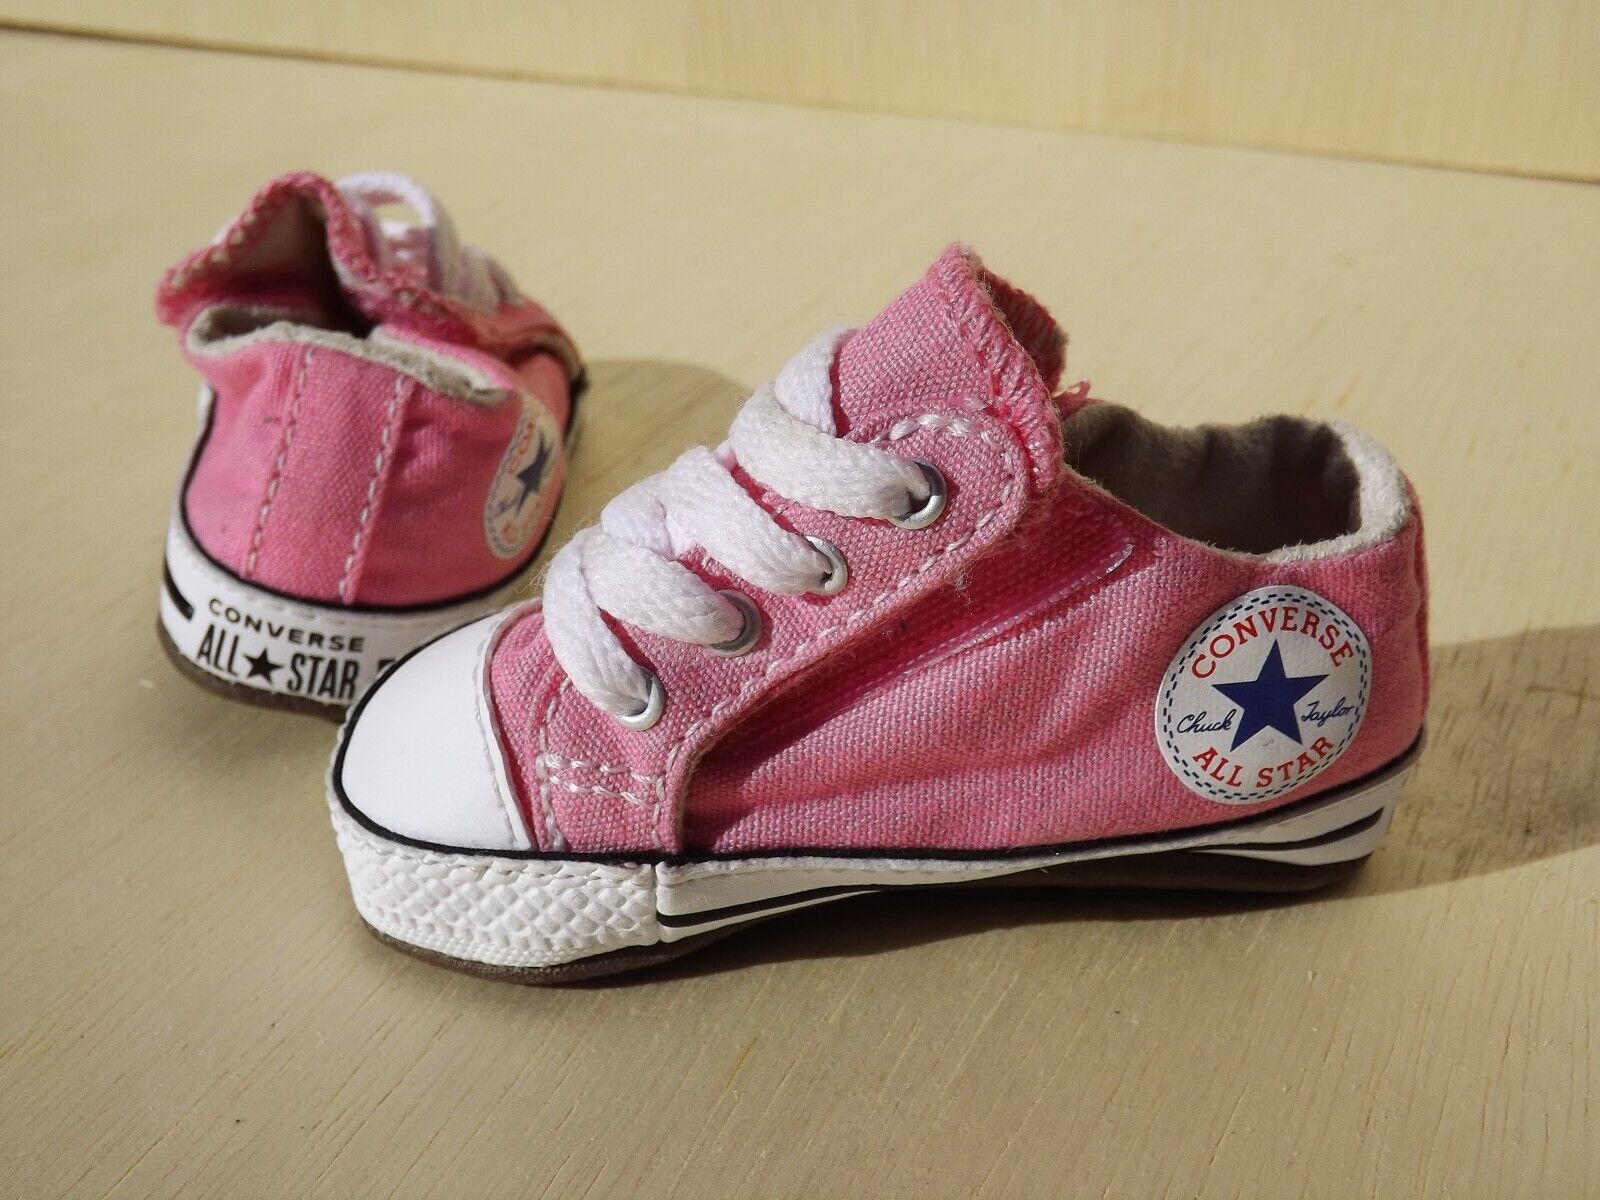 Converse Chuck Taylor Crib Shoes Size 1C Pink/White Baby Girl | eBay